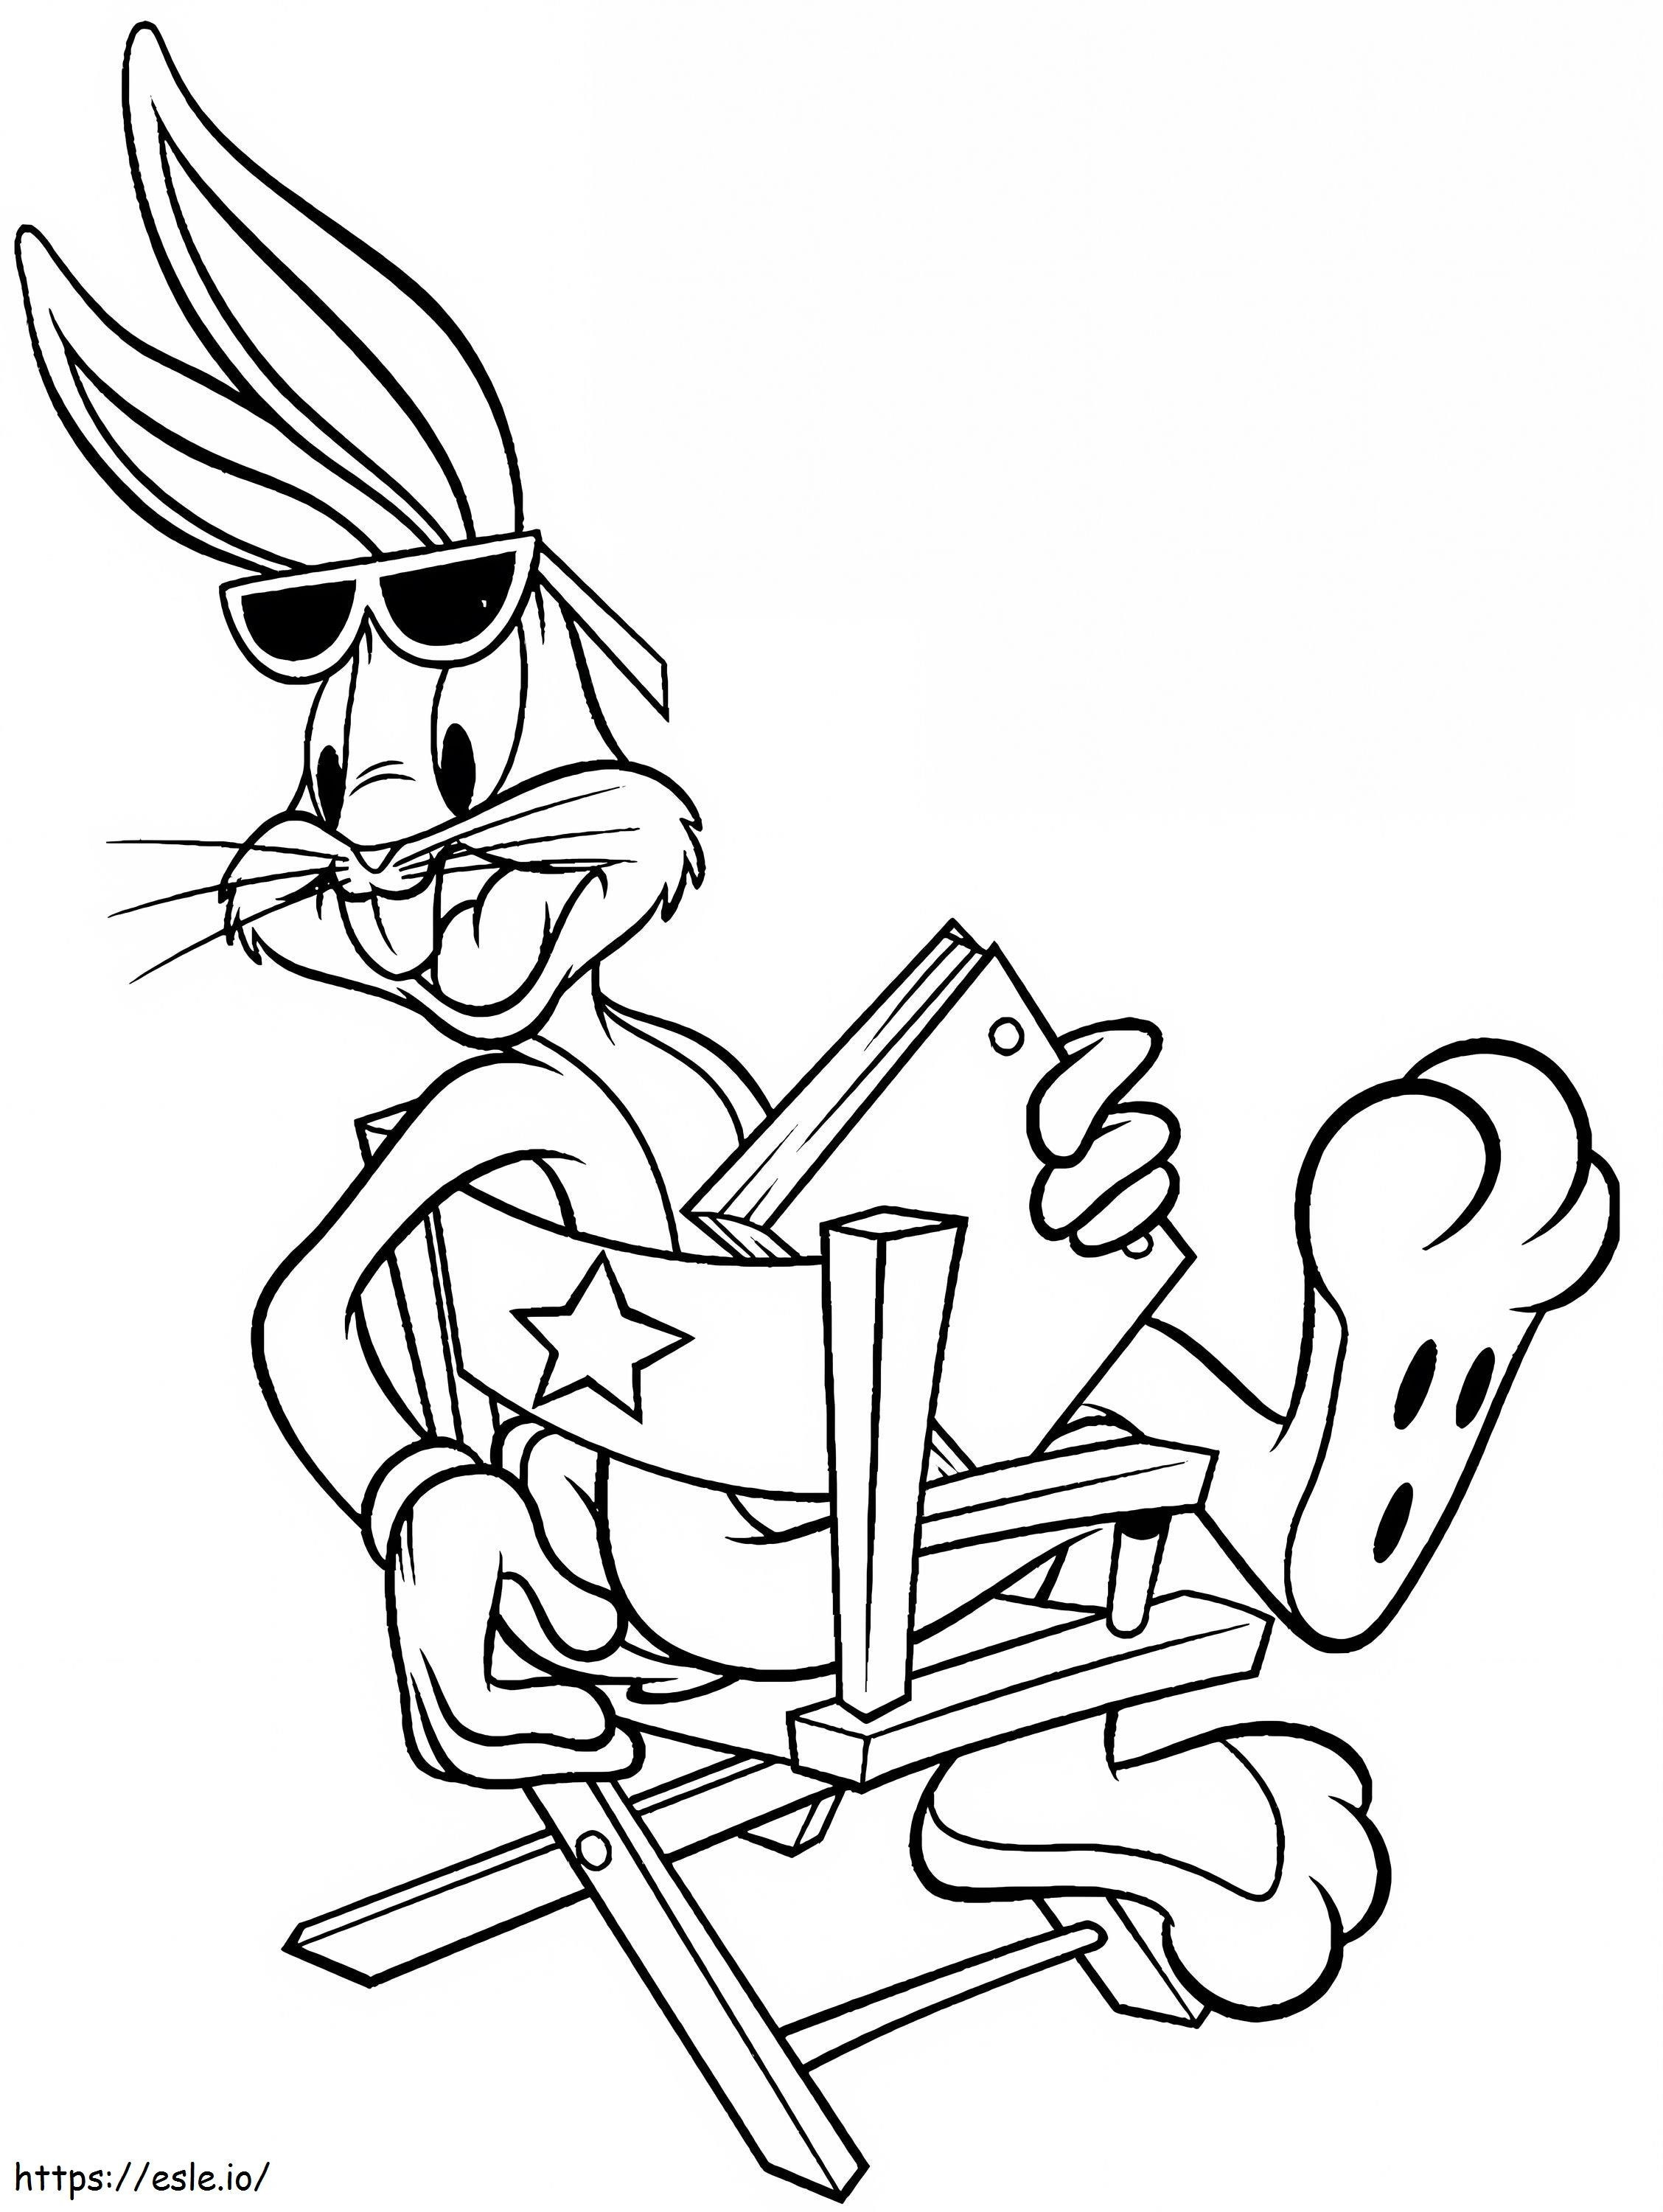 Bugs Bunny Holding A Book Sitting In A Chair coloring page